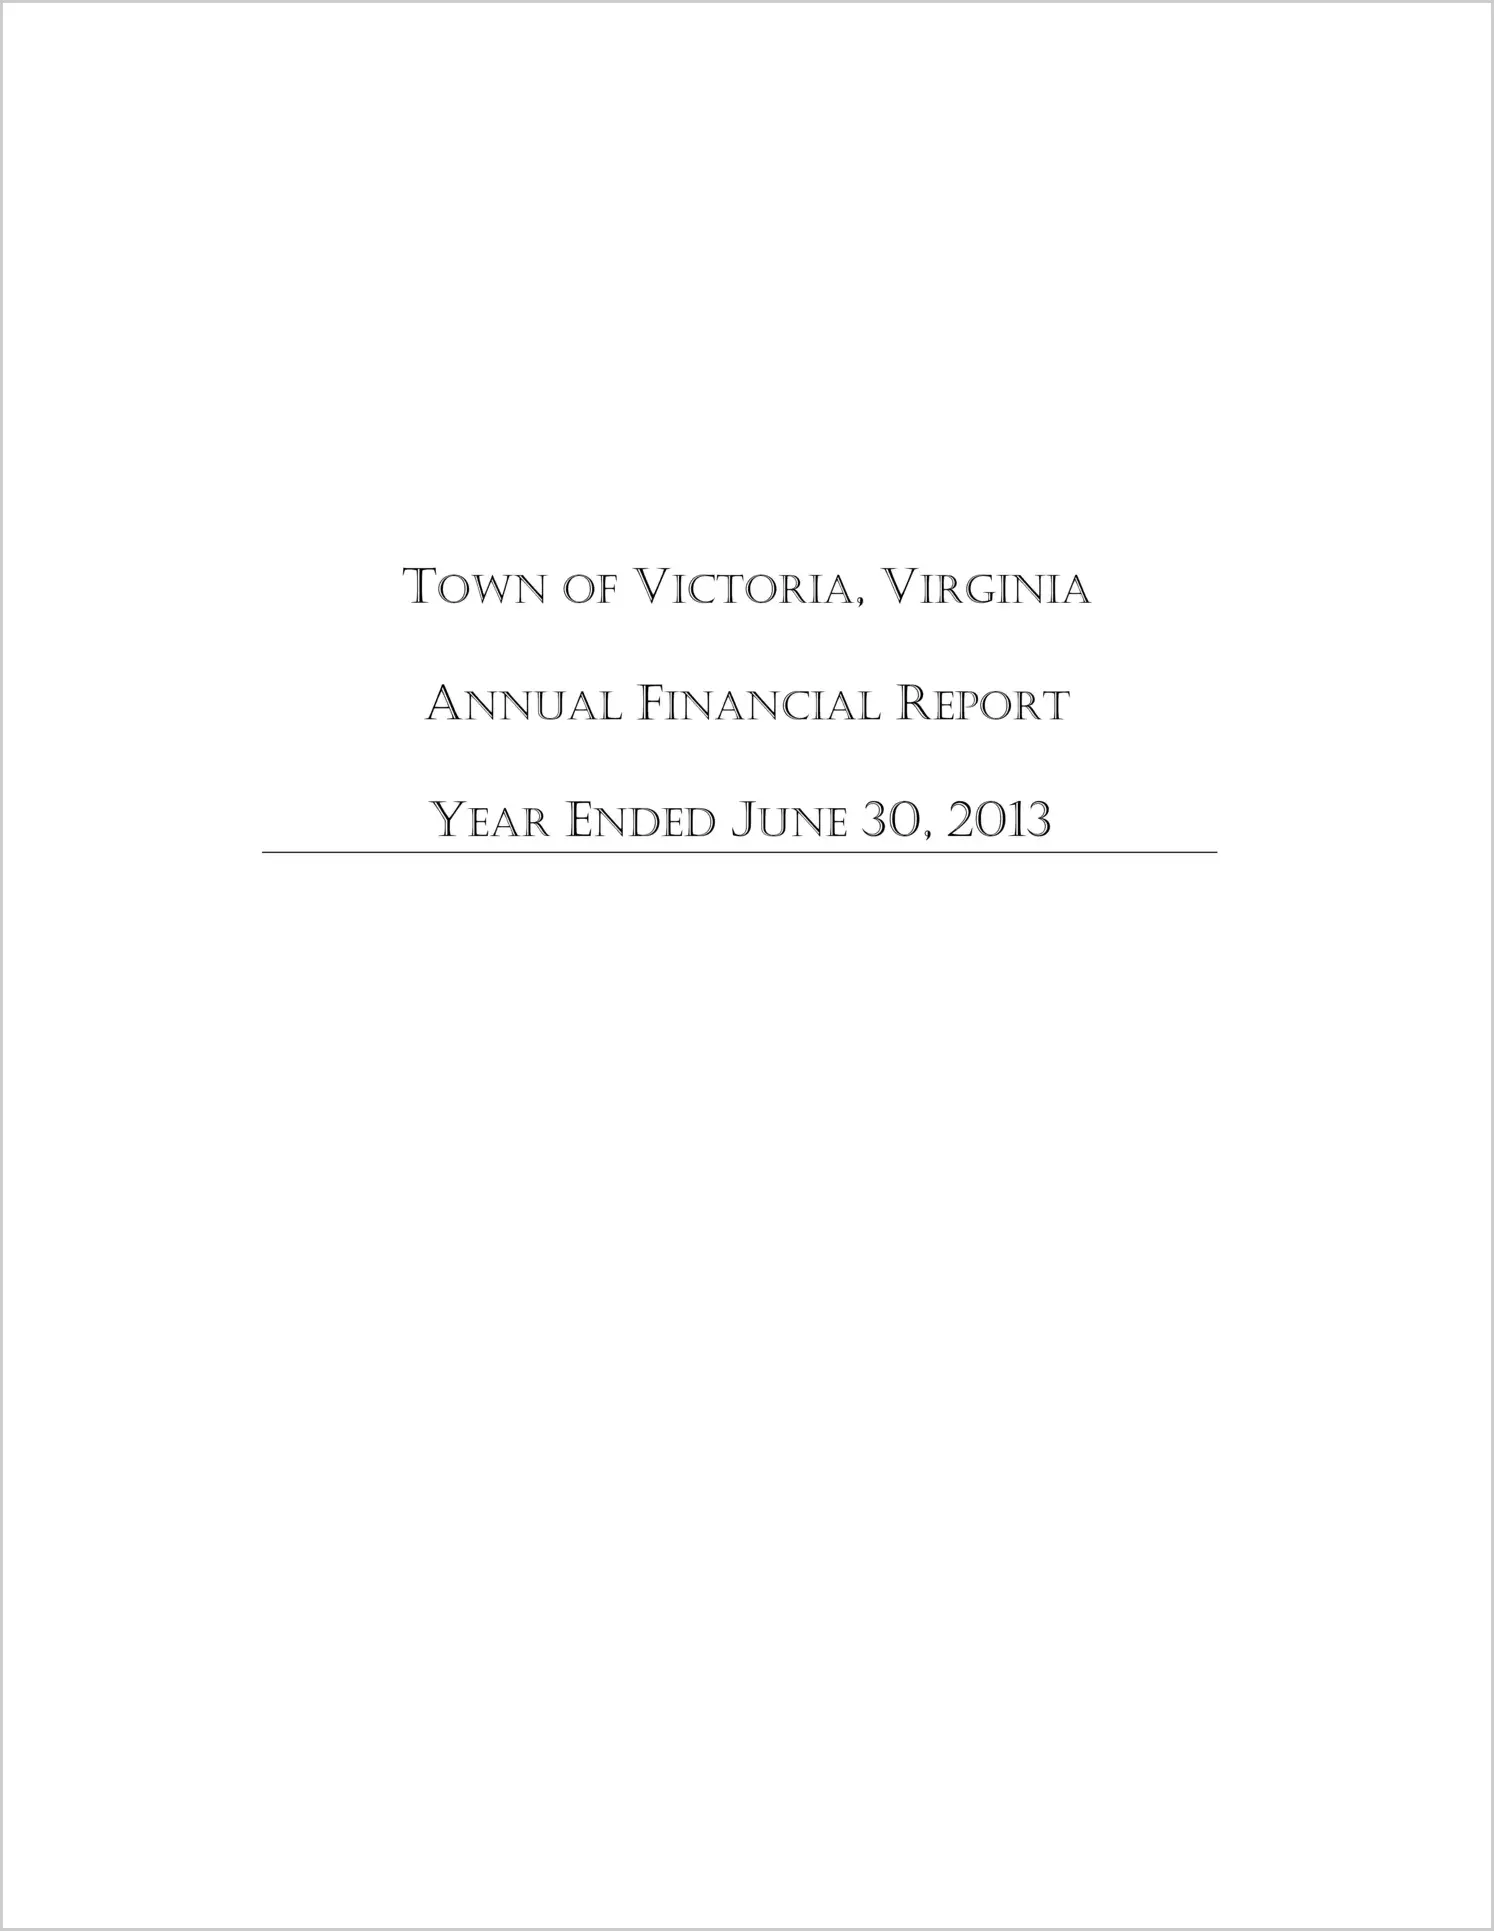 2013 Annual Financial Report for Town of Victoria